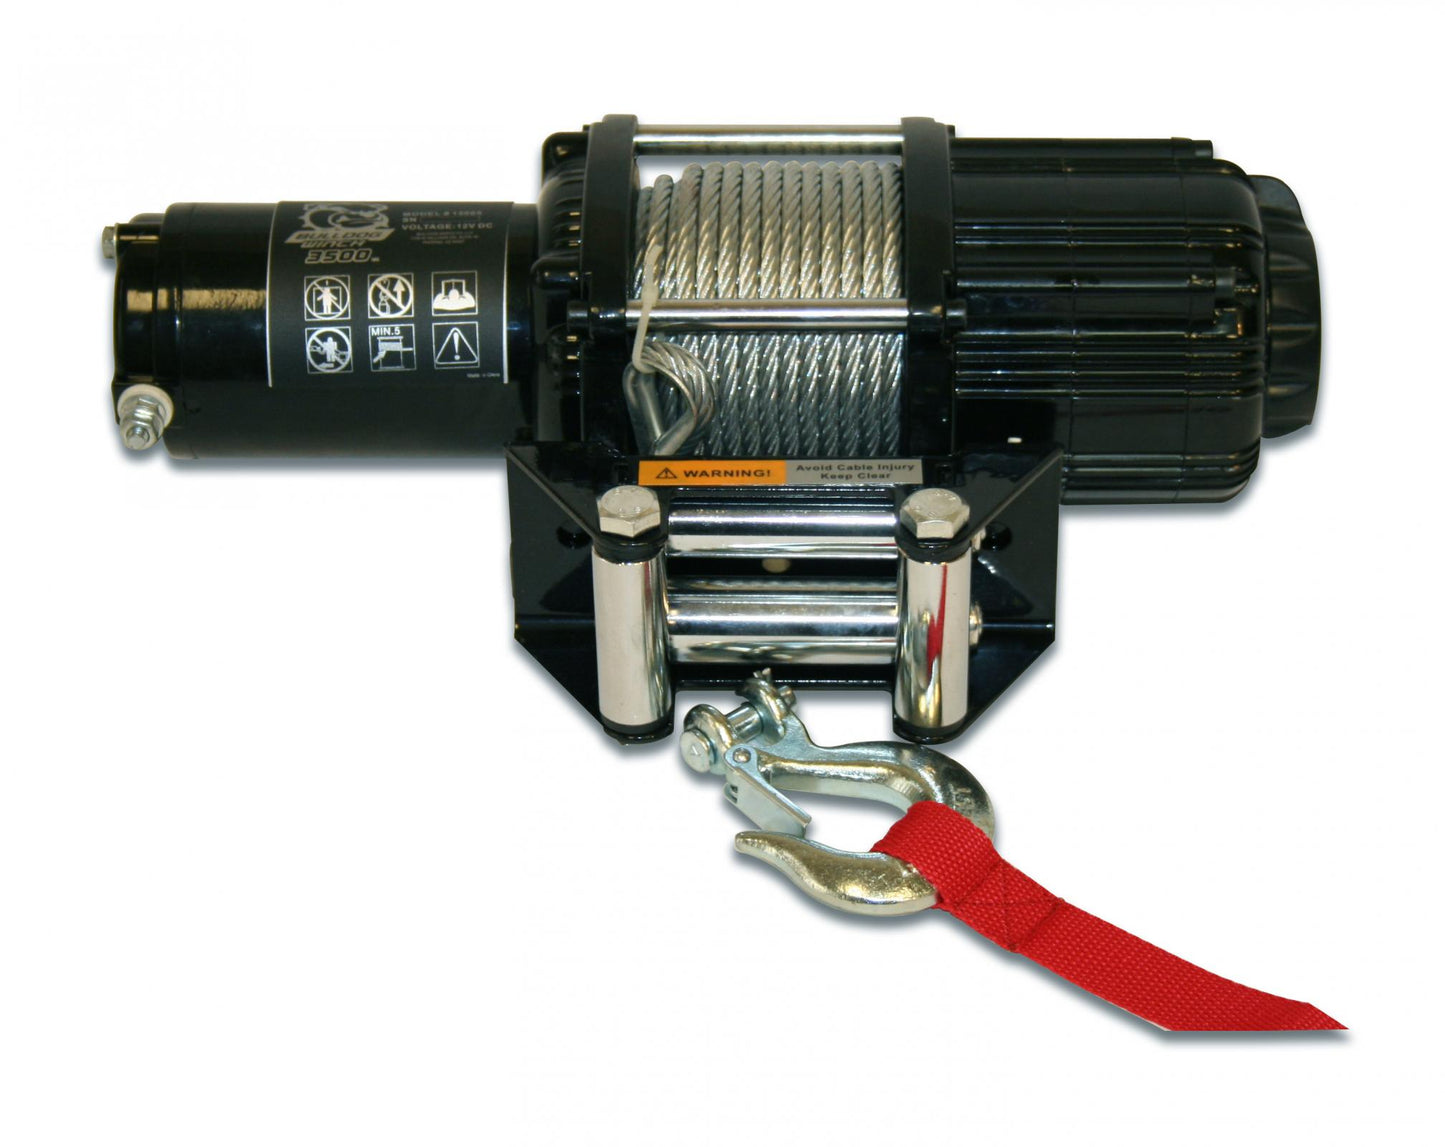 Bulldog Winch 3,500 LB UTV Winch 50 Ft Wire Rope Two Switches Mounting Channel Roller Fairlead